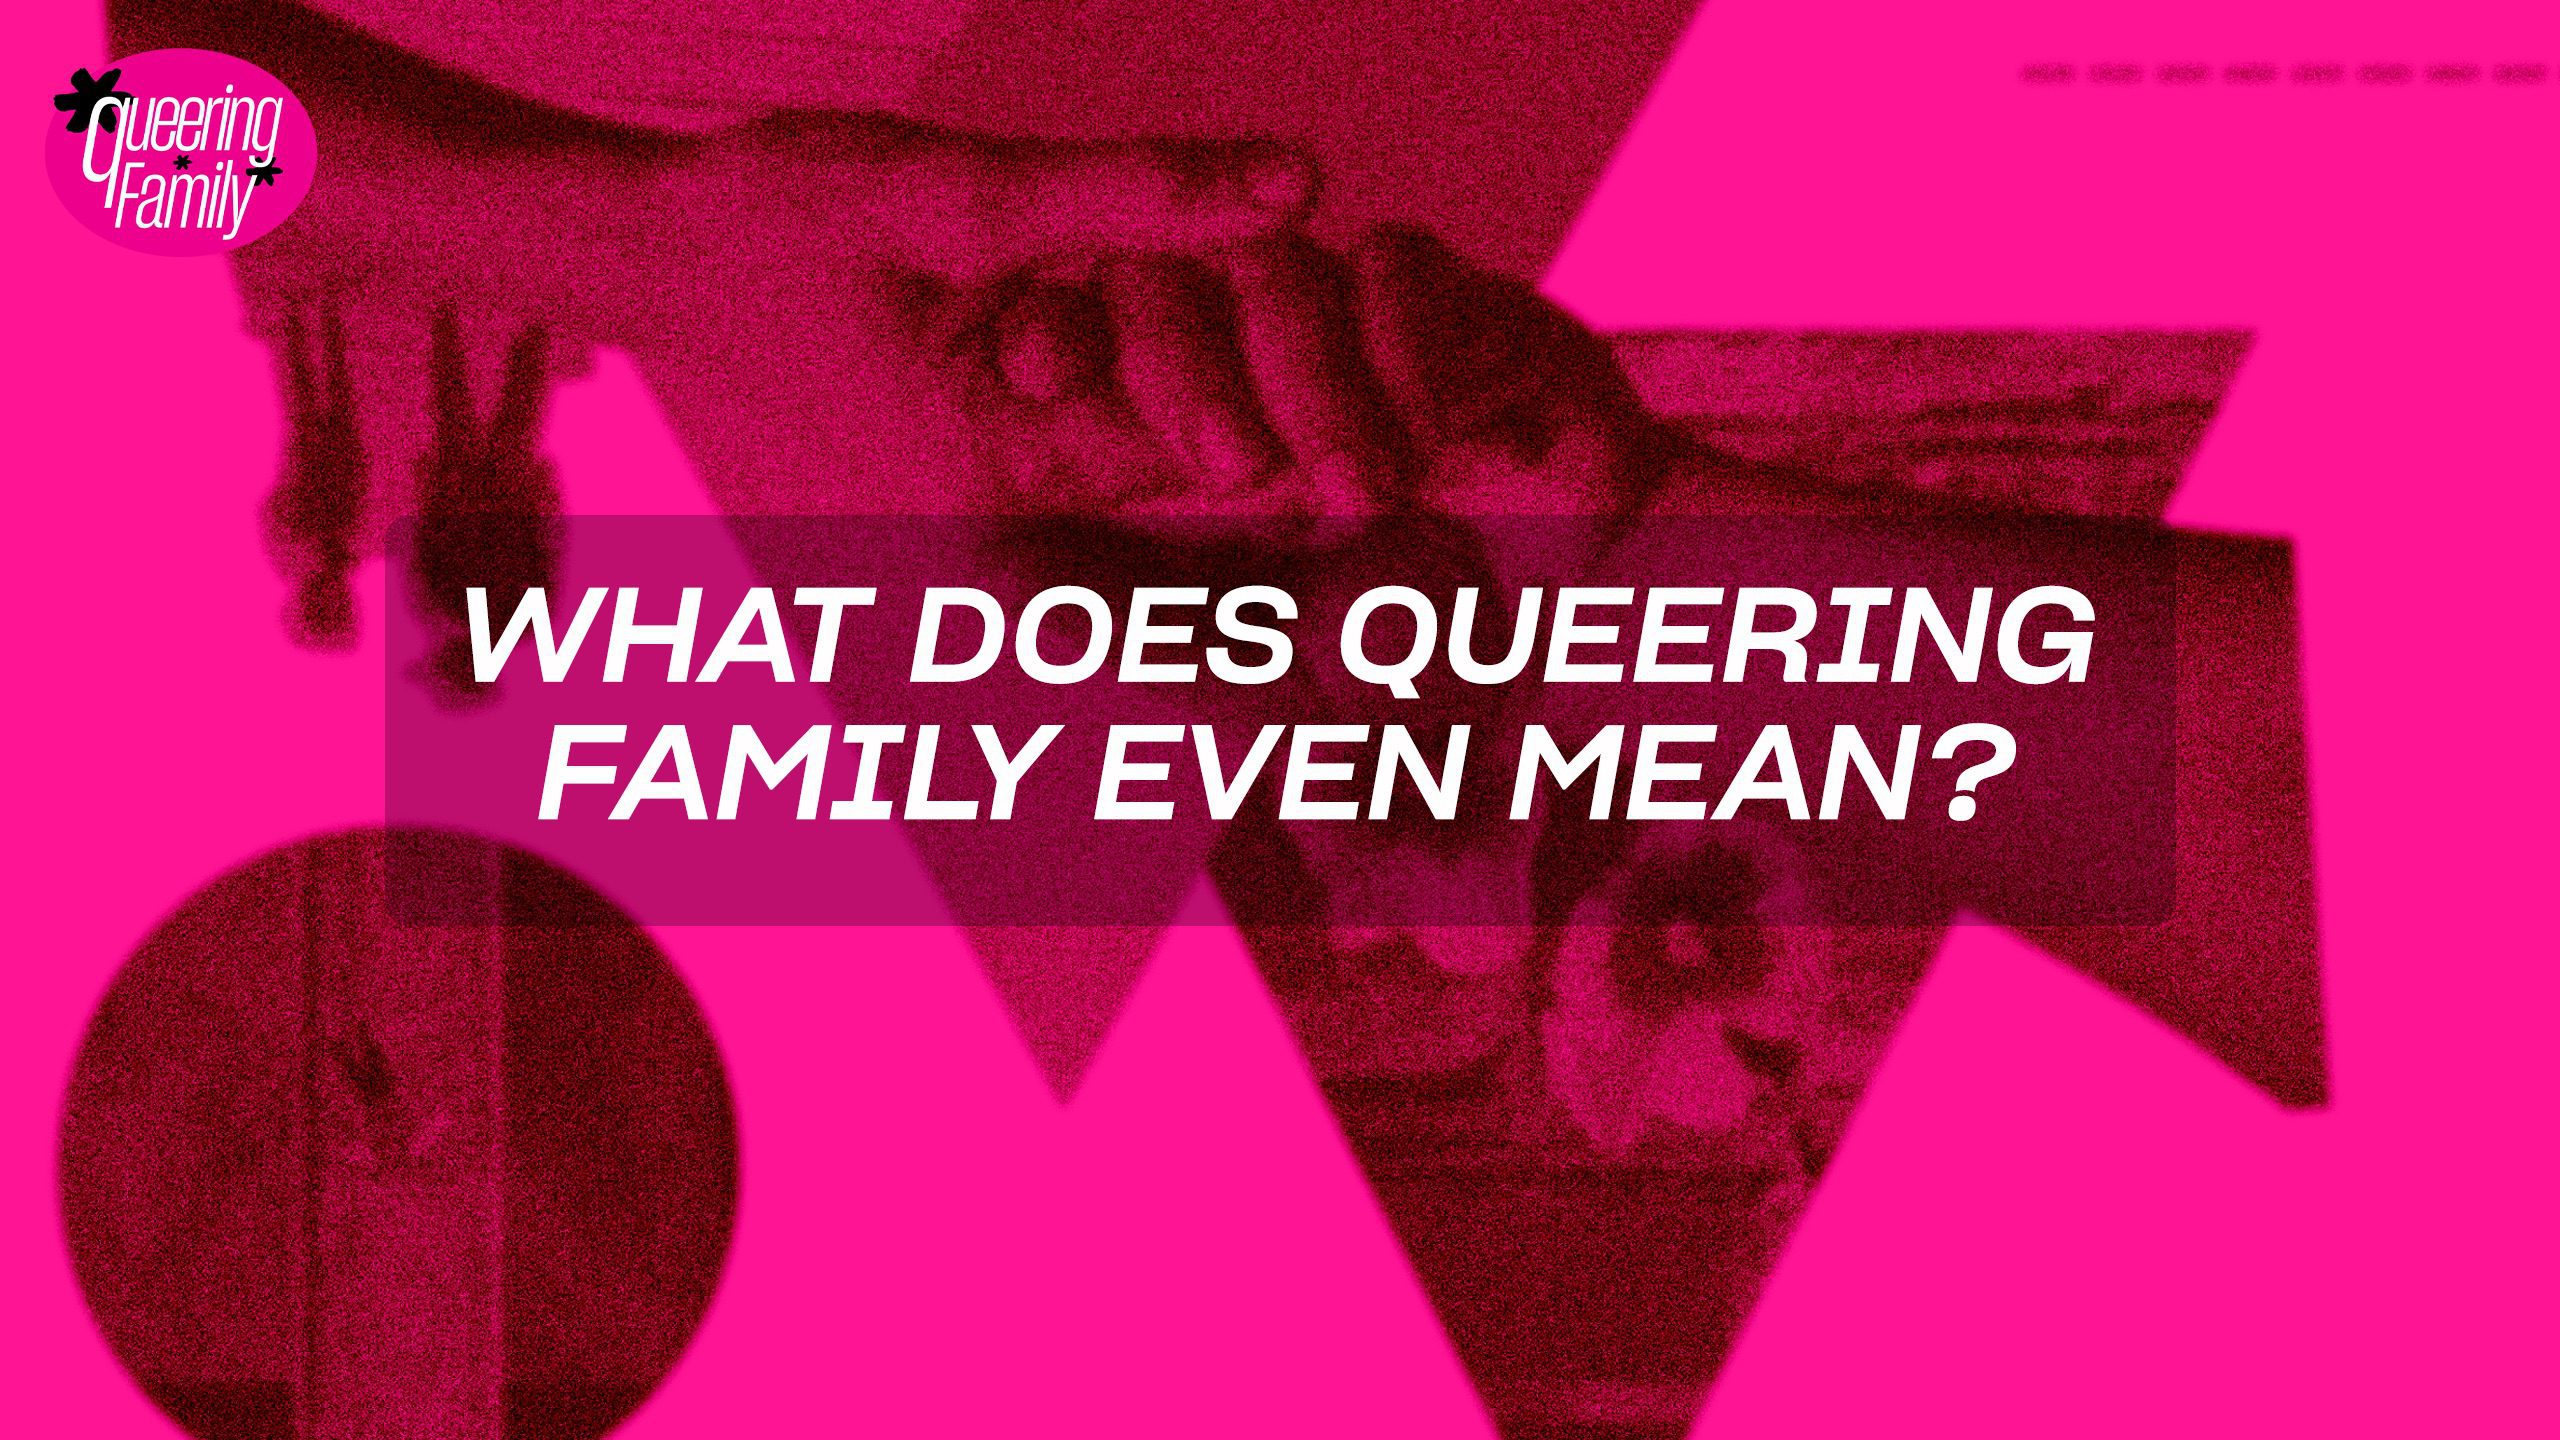 How can we build queer family and bridge generations?